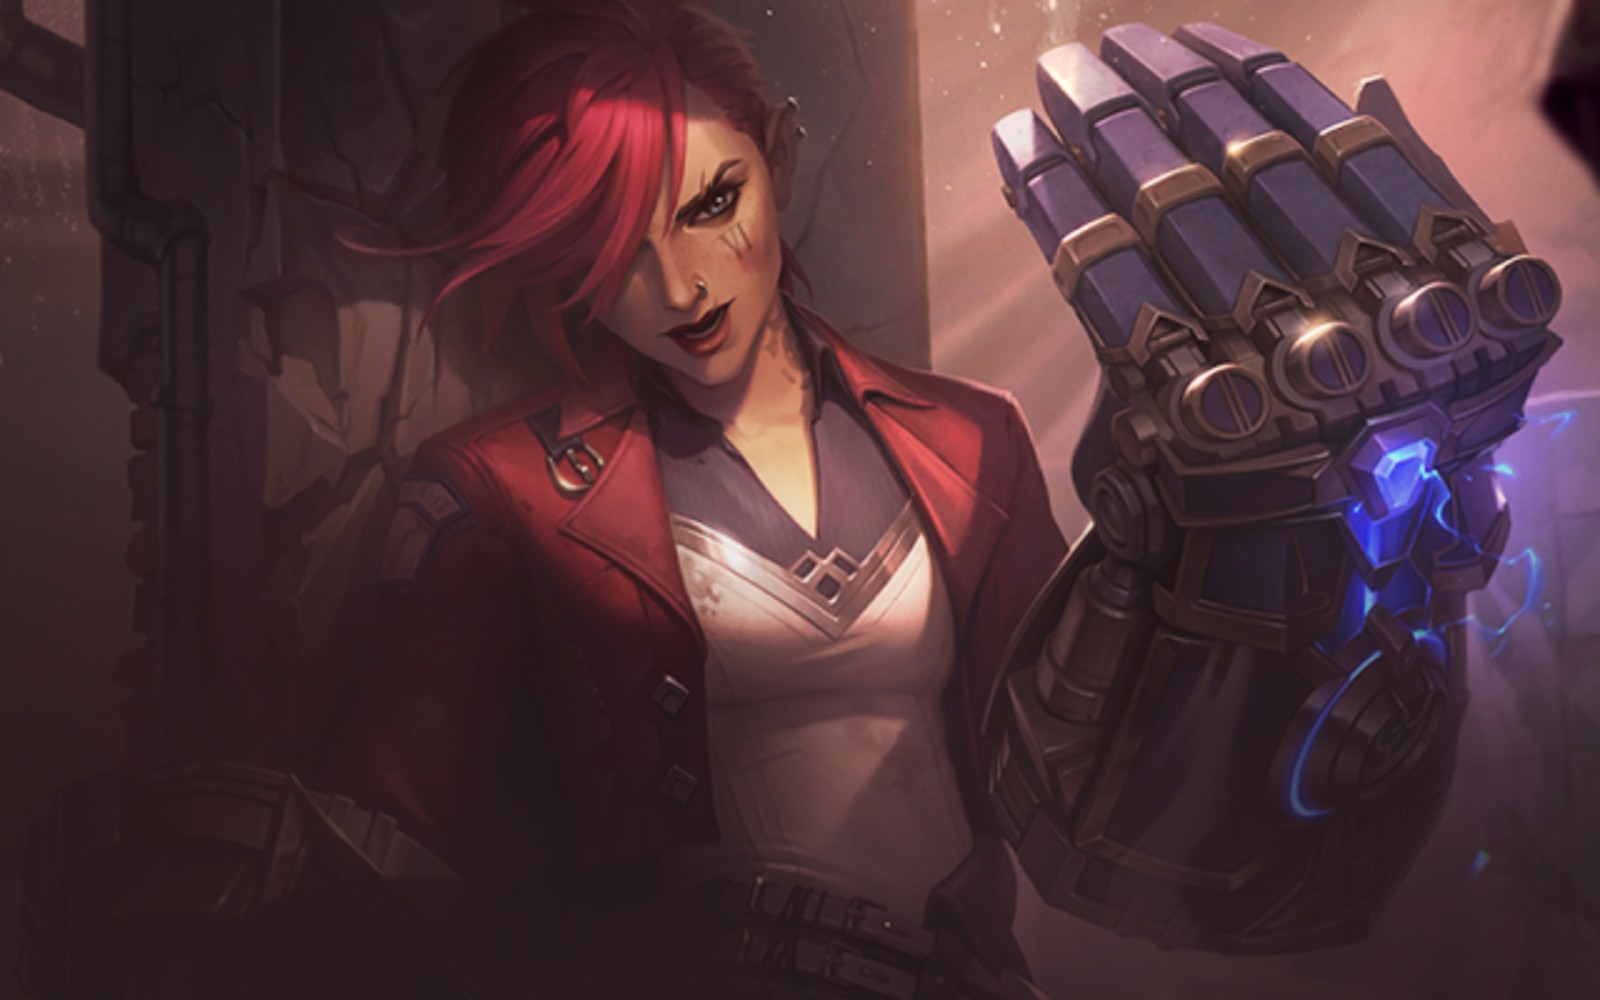 photo of Vi from ‘League of Legends’ arrives in ‘Fortnite’ image